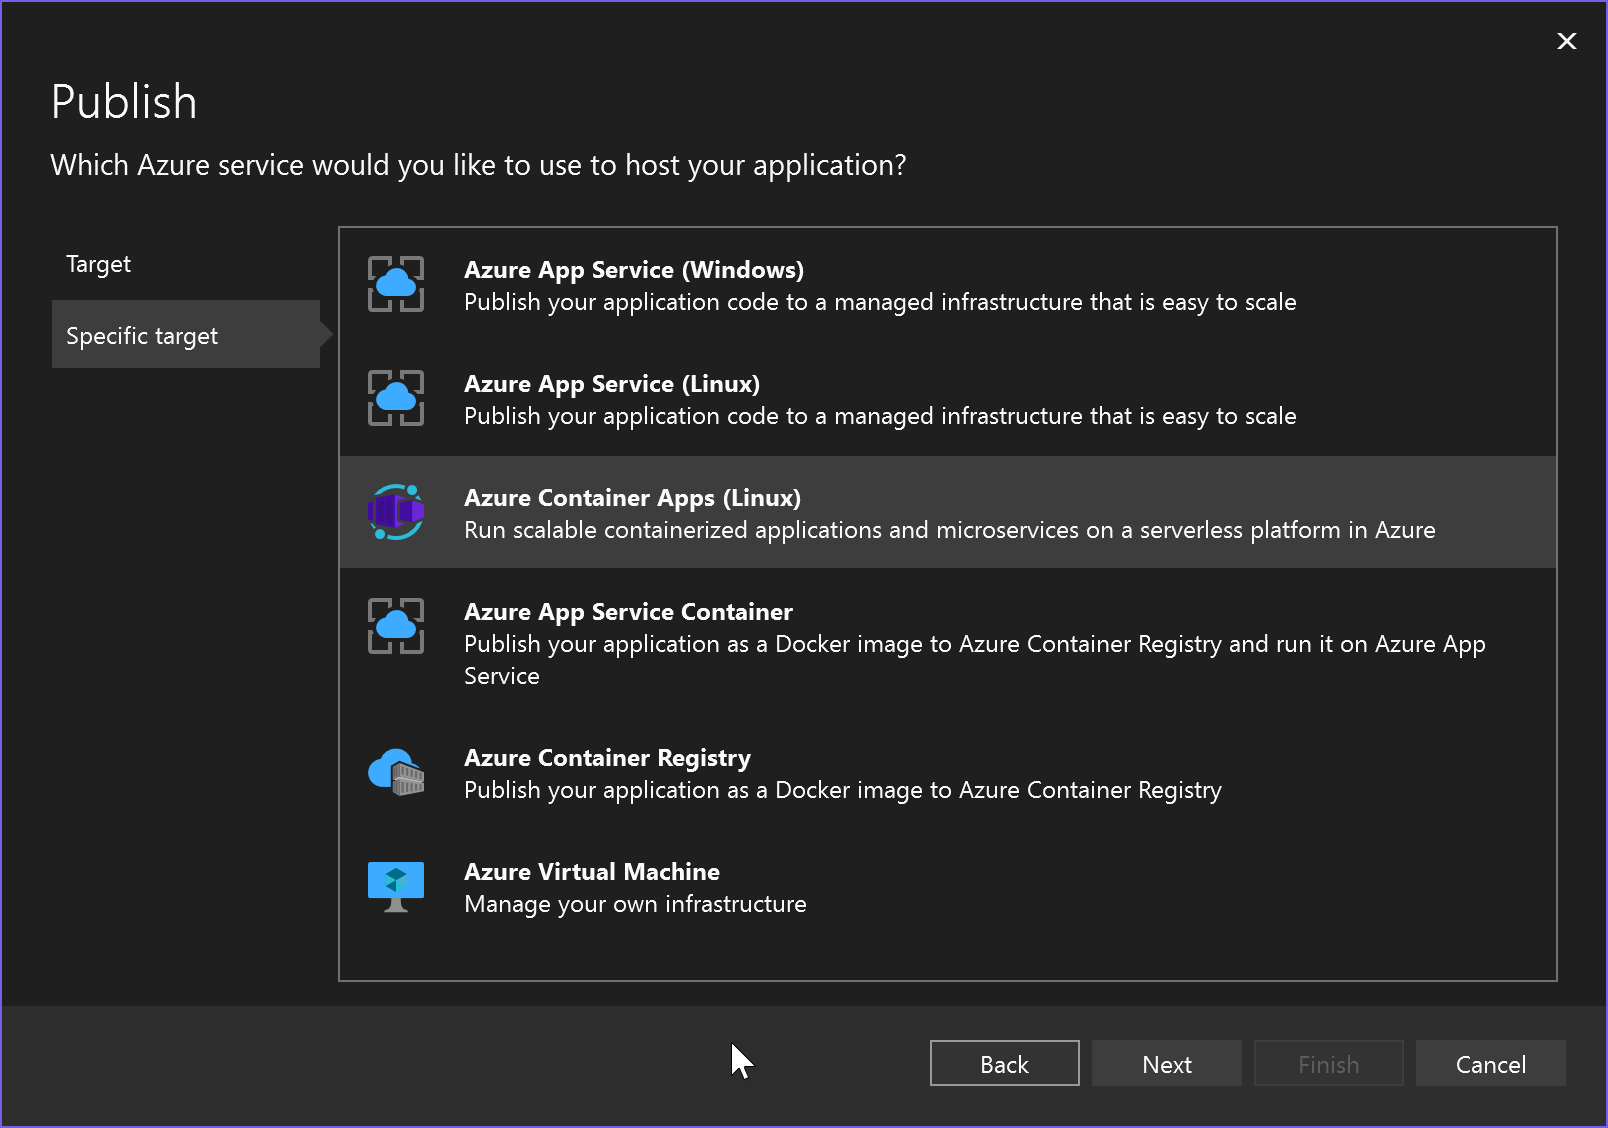 Screenshot of Publish screen with Azure Container Apps (Linux) selected.